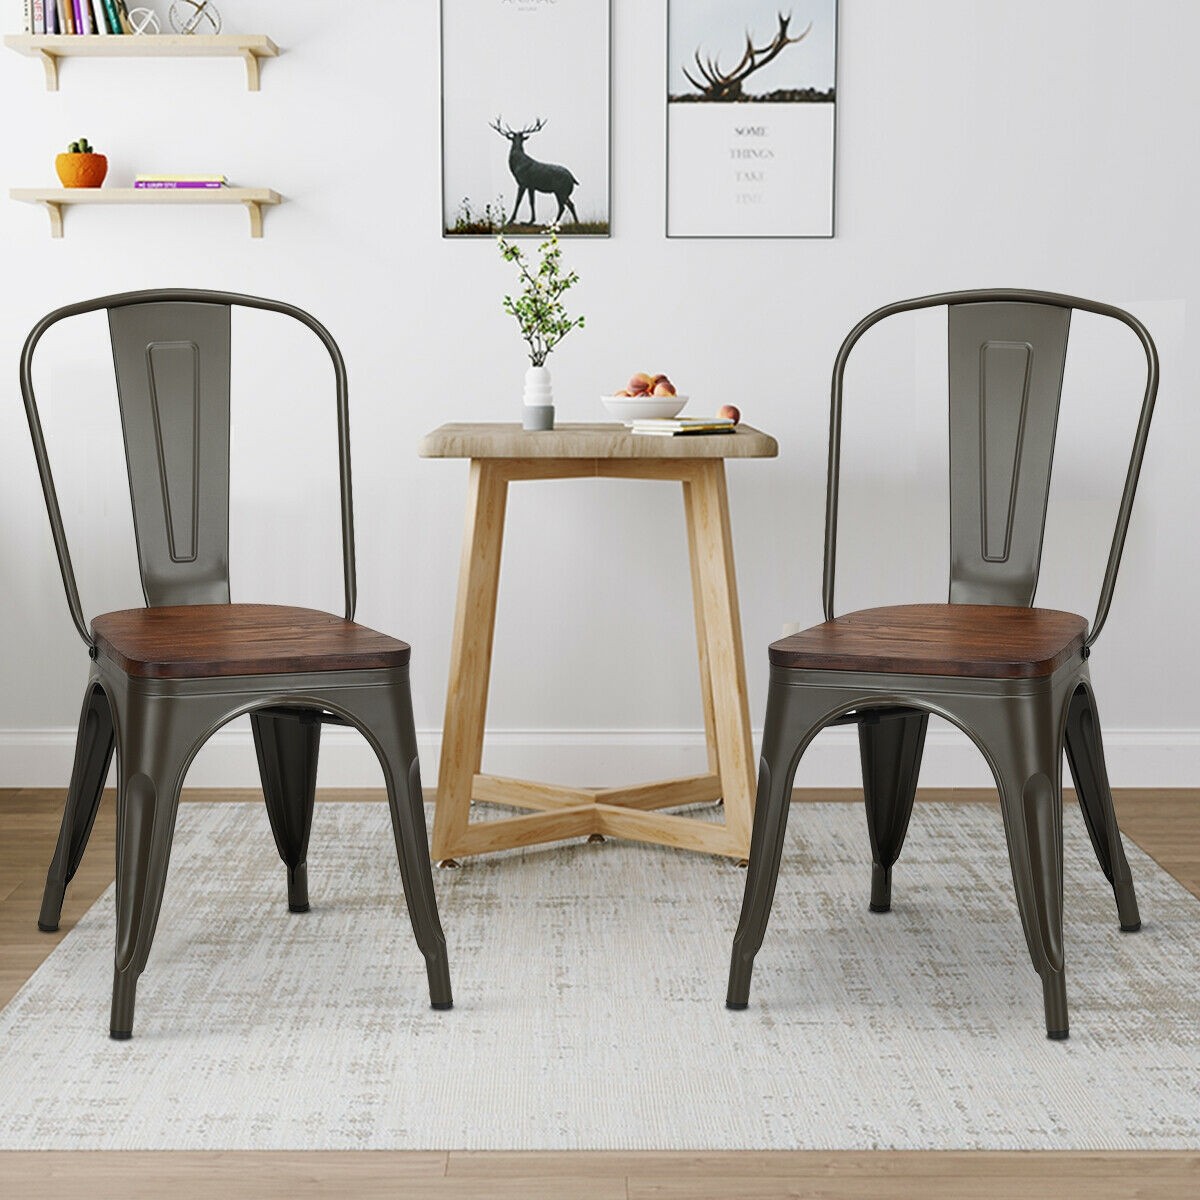 Set Of 4 Stackable Tolix Style Metal Wood Dining Chair